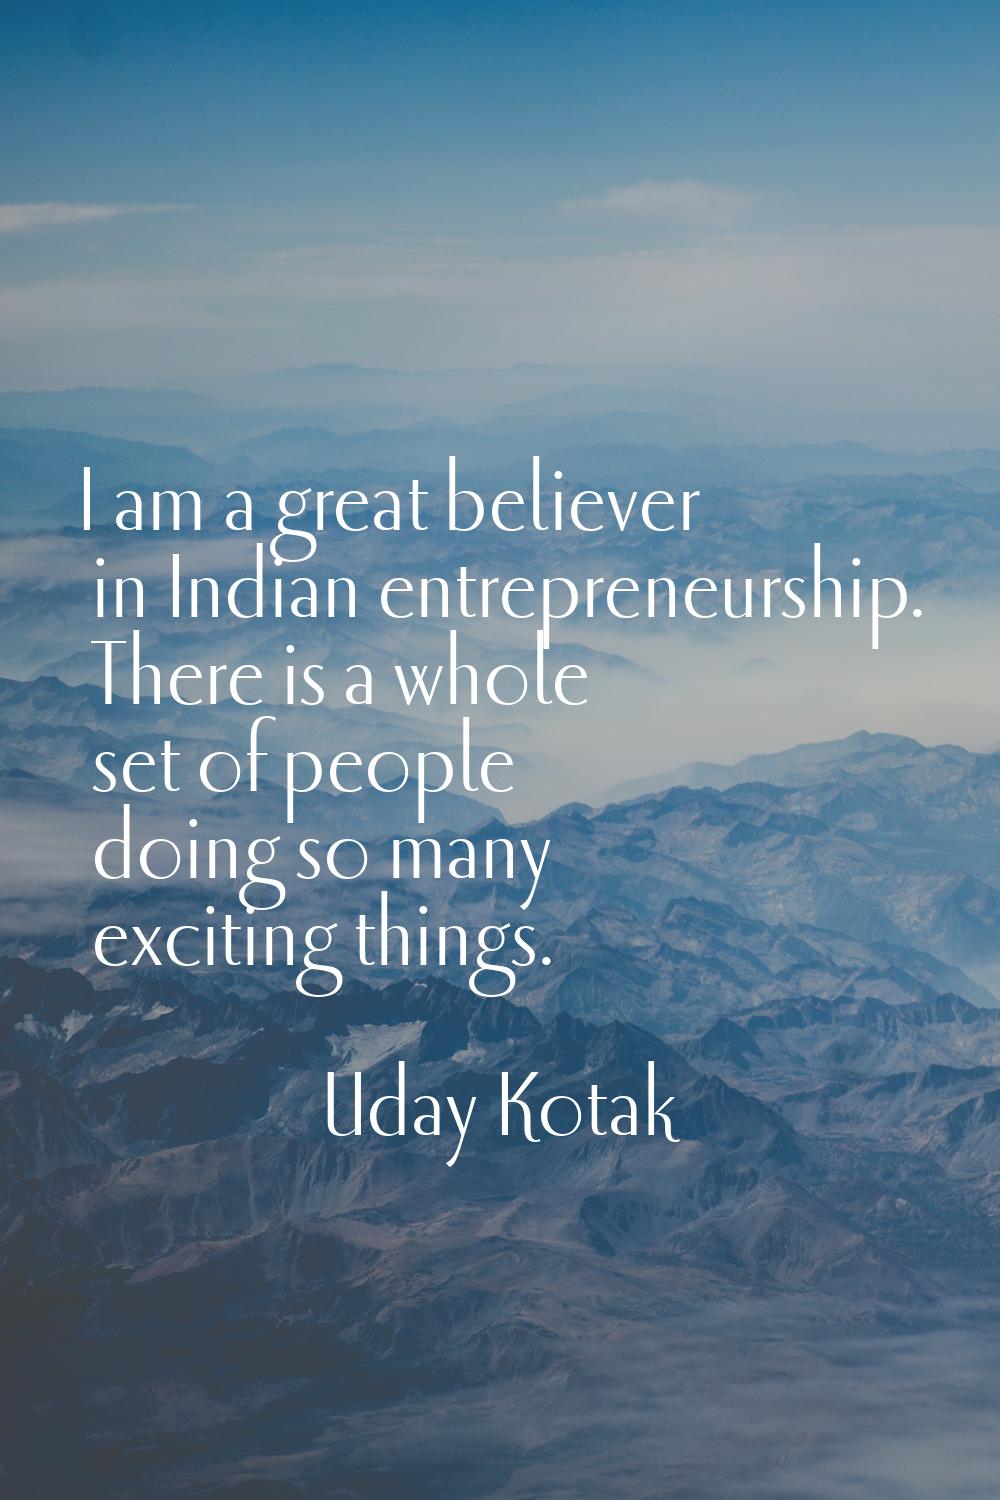 I am a great believer in Indian entrepreneurship. There is a whole set of people doing so many exci